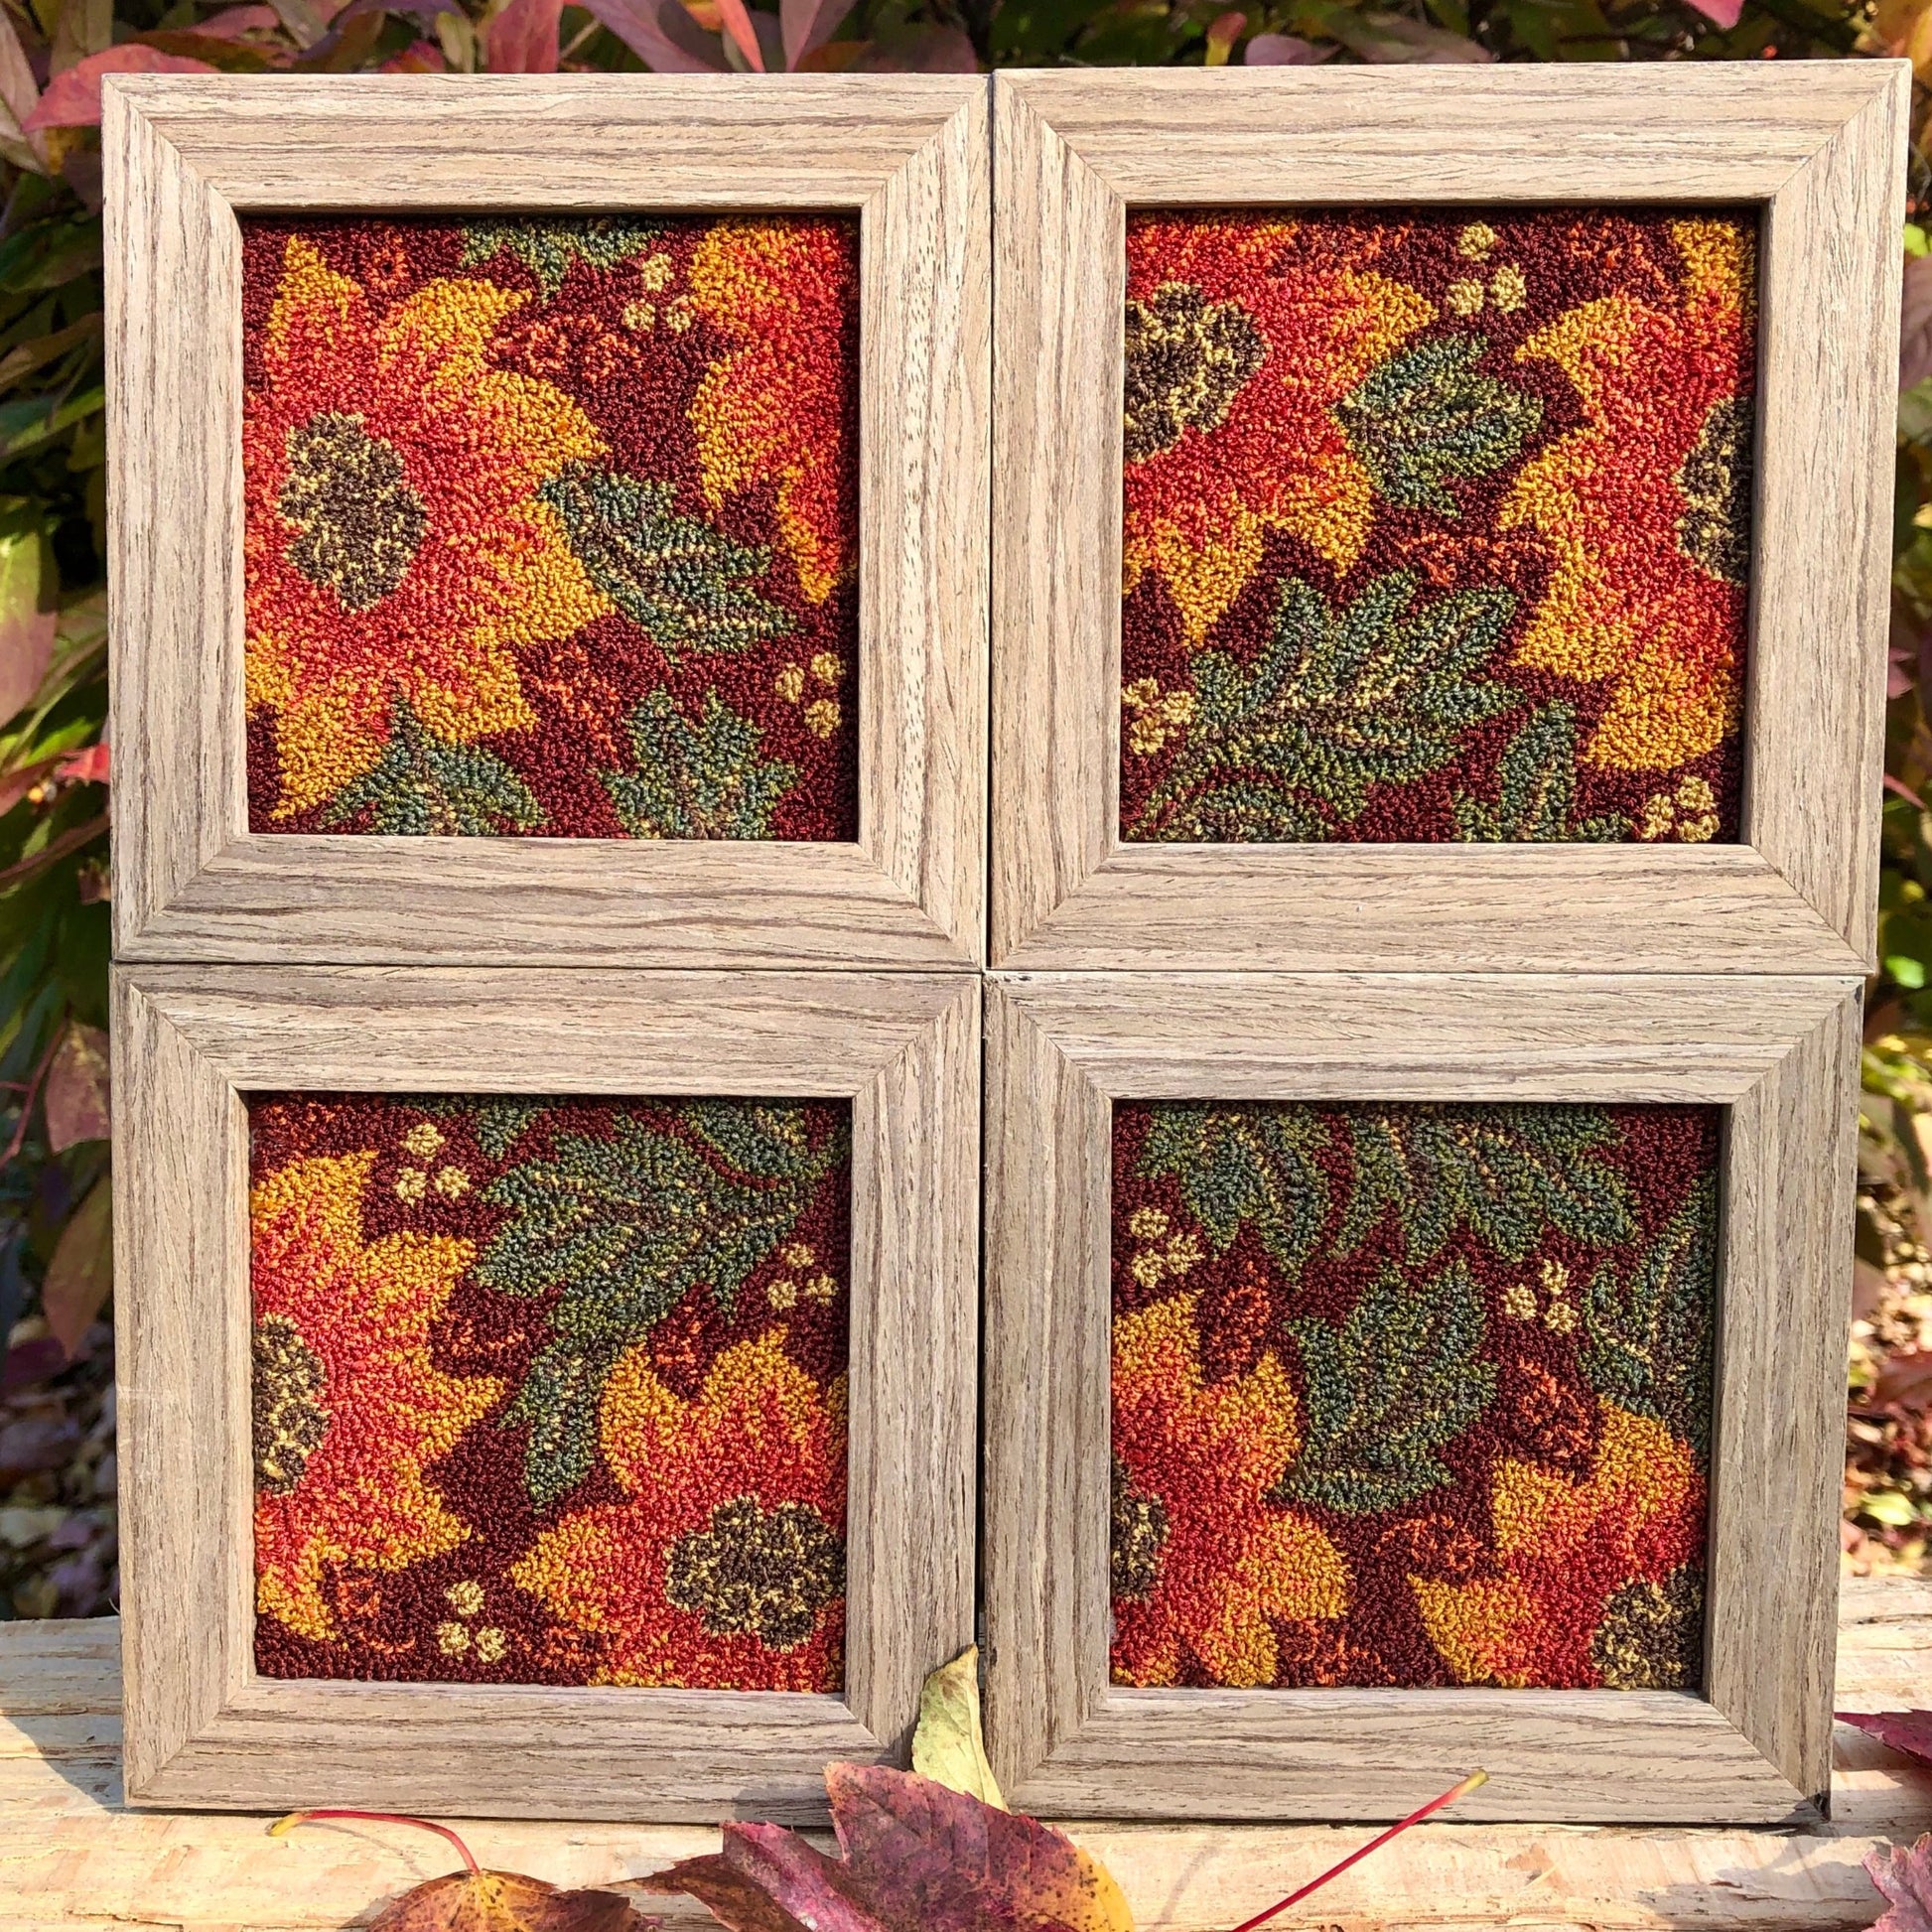  Autumn Glow- Set of 4 Punch Needle Patterns, By Orphaned Wool, Available as a Paper Pattern and Pattern on Weaver's Cloth